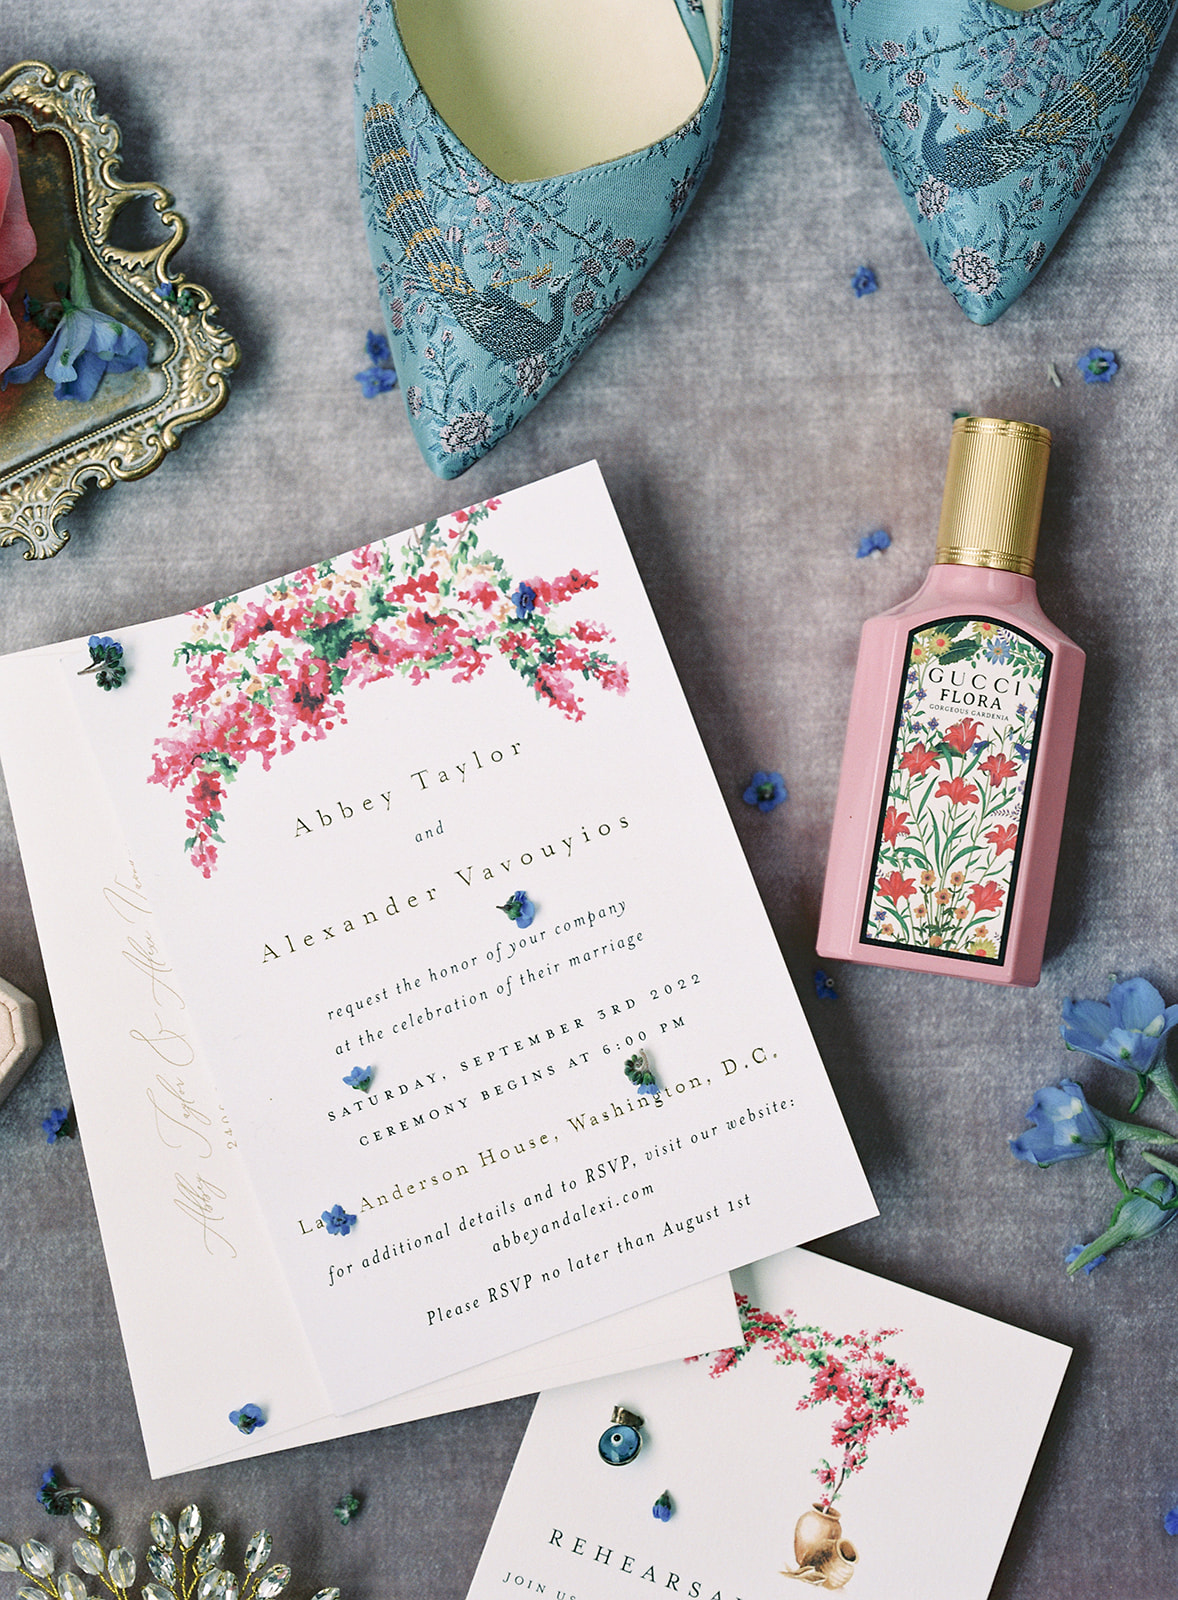 PINK FLORAL WEDDING INVITES AND ACCESSORIES